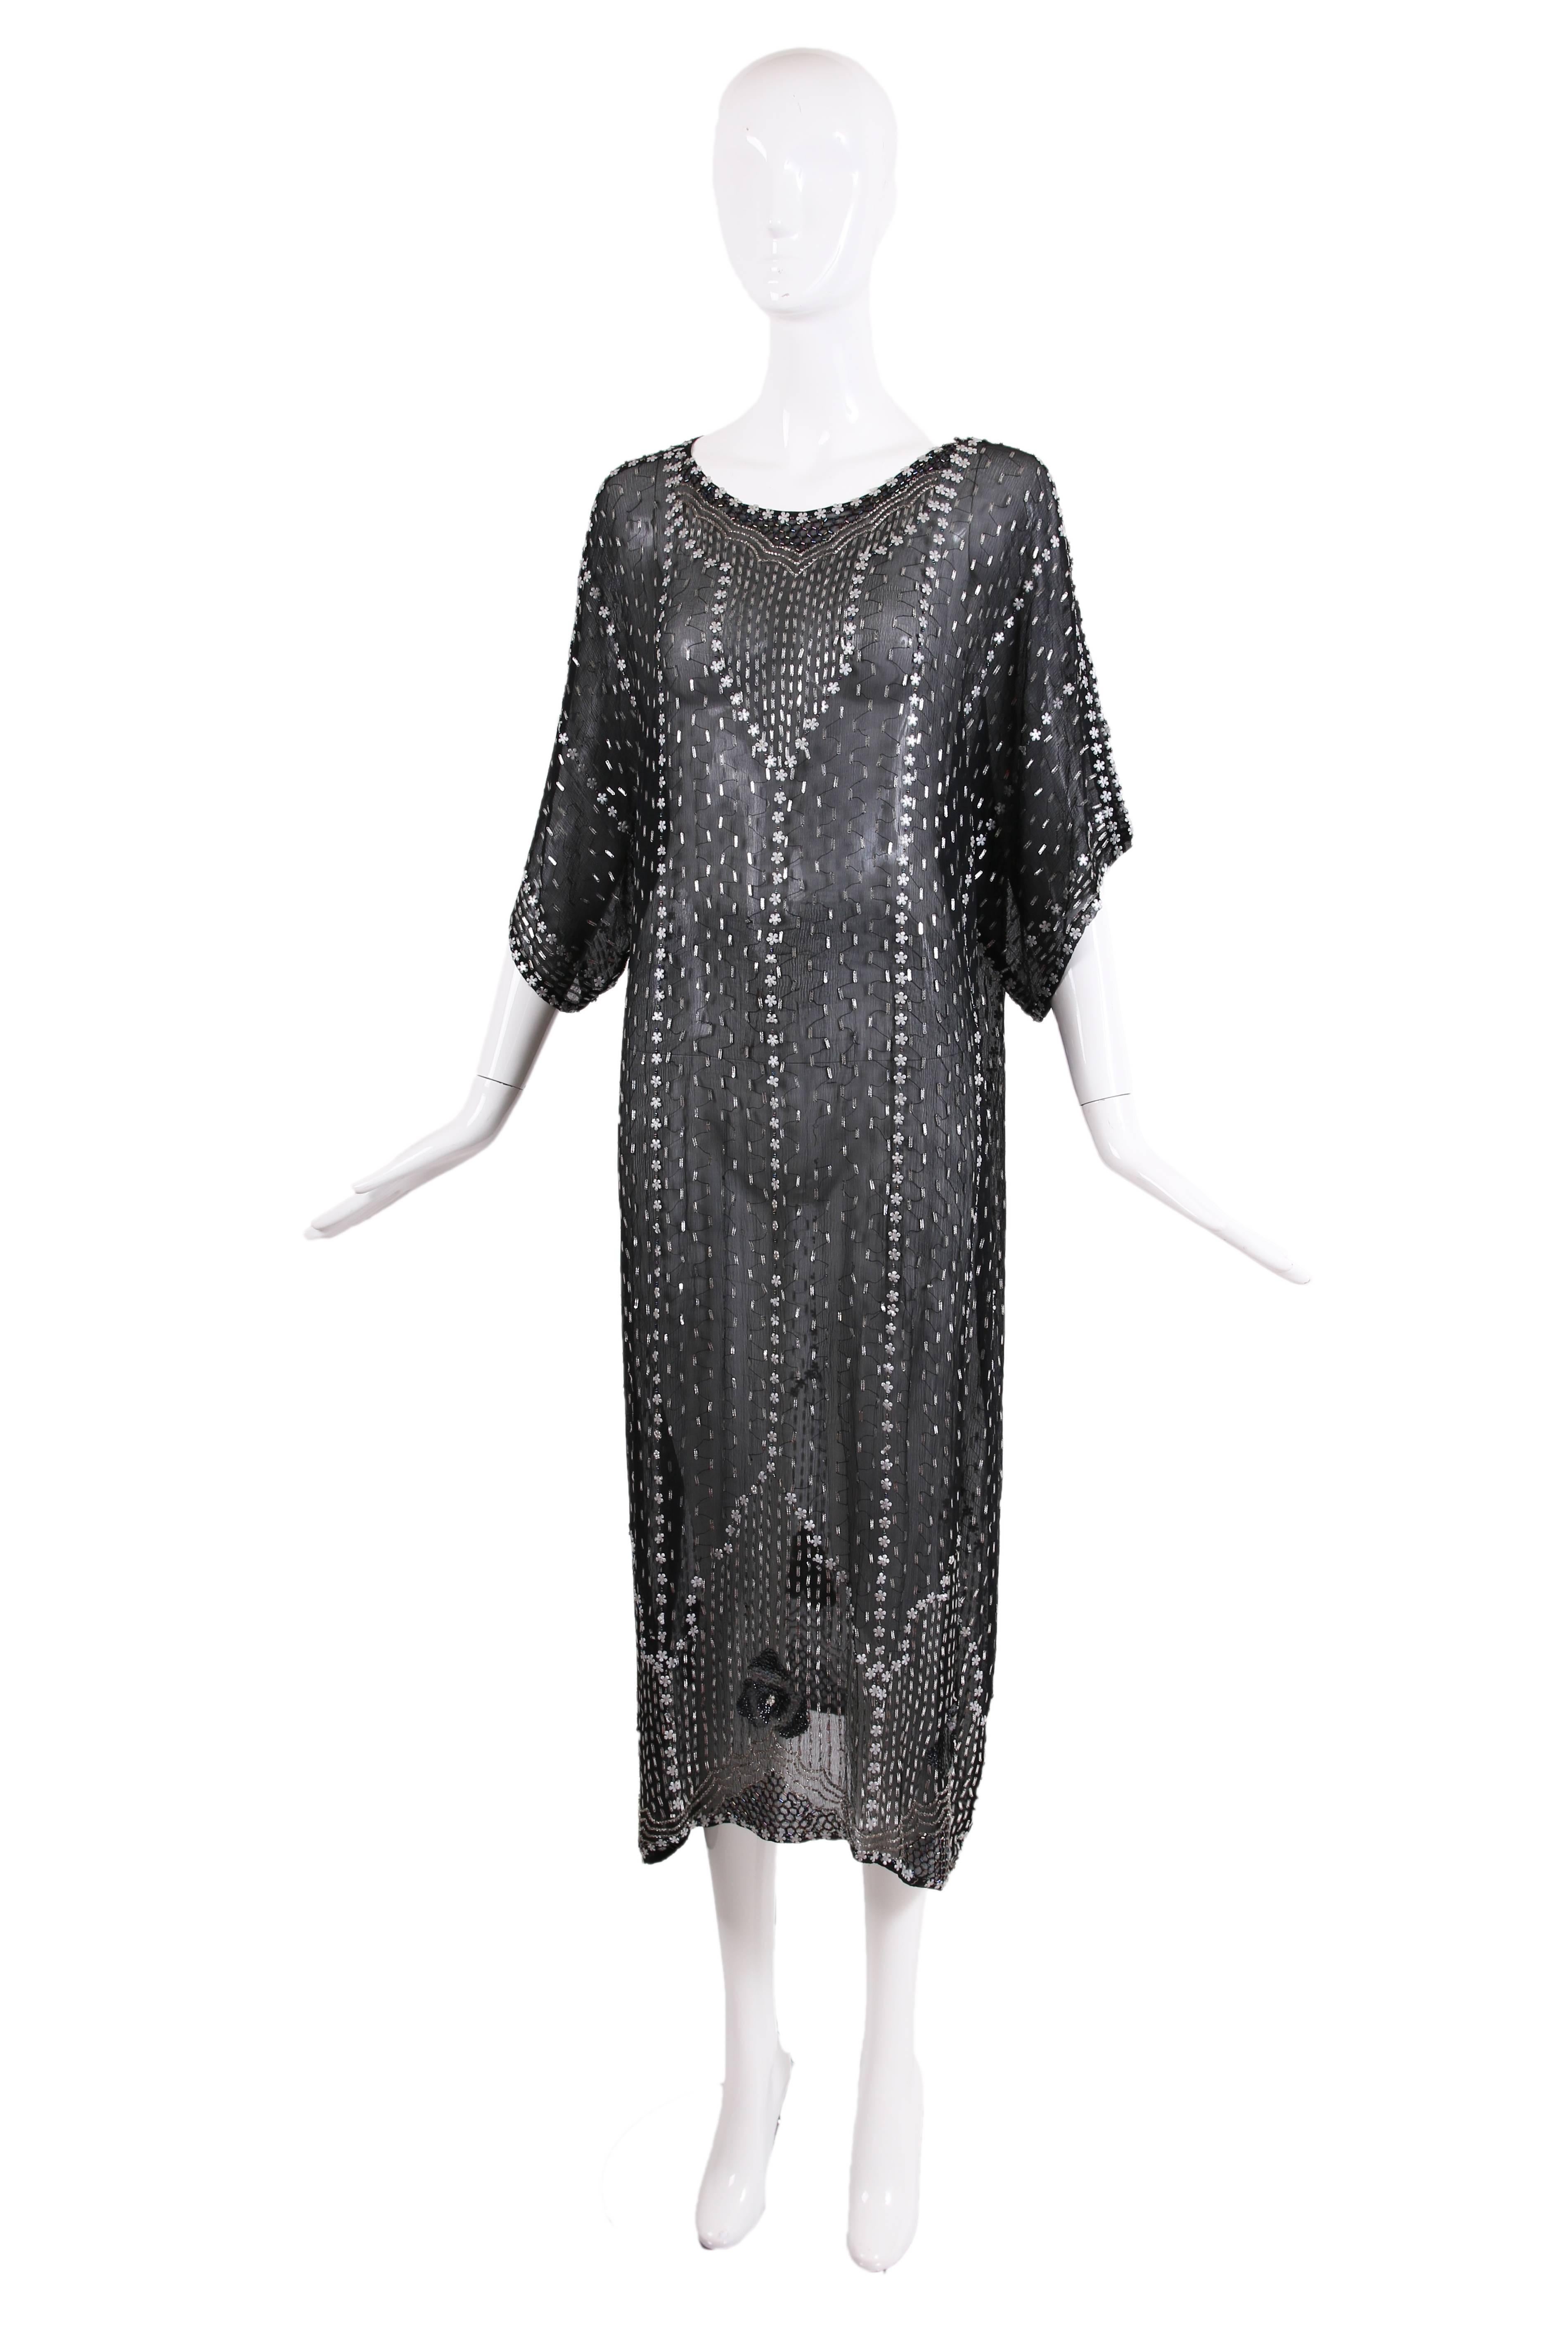 Vintage black silk sheer dress or caftan with beading and appliqués all over and sequined flowers at the hem. In very good to excellent condition with some missing beads at neckline. Will fit a variety of sizes due to shape.
MEASUREMENTS: 
47.5” long